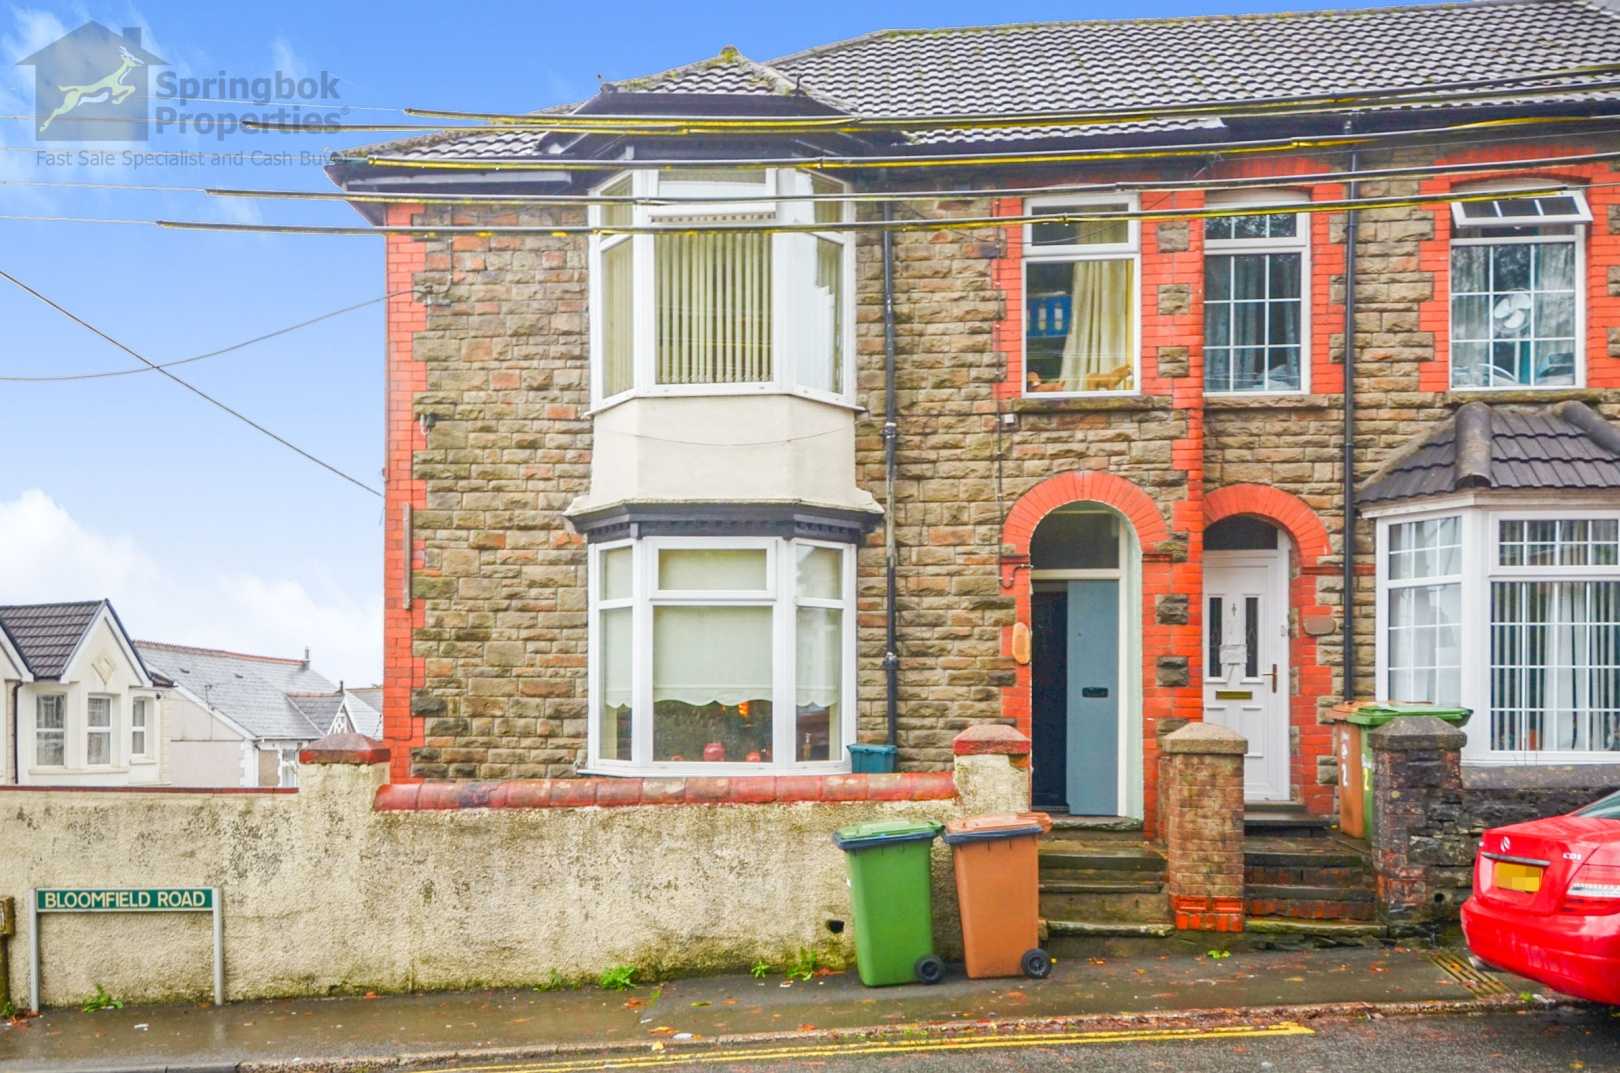 House in Blackwood, Caerphilly 11125738